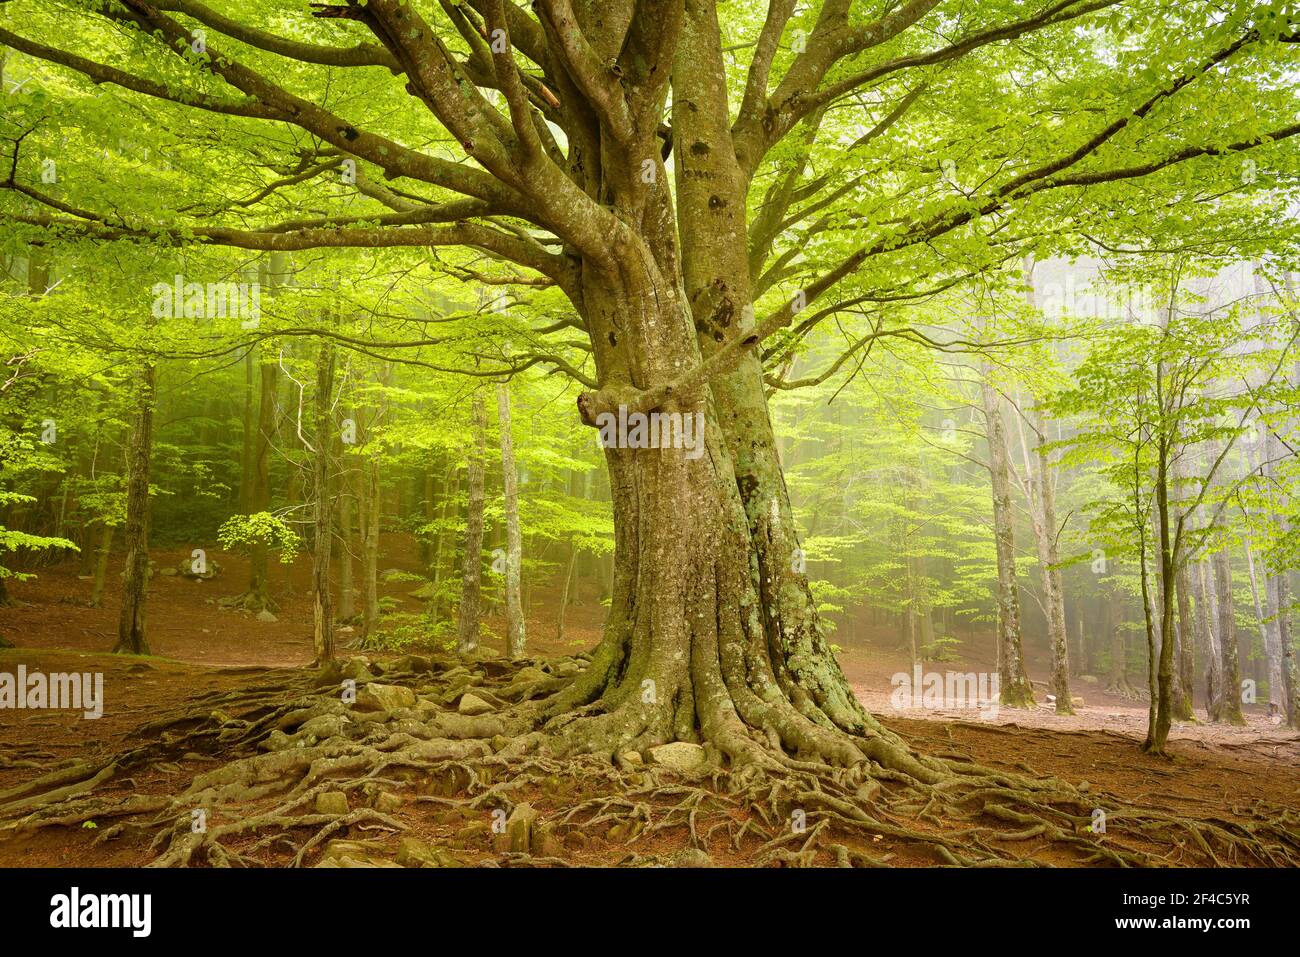 Two large beech trees in the Santa Fe de Montseny beech forest, in a foggy spring day (Montseny, Catalonia, Spain) Stock Photo